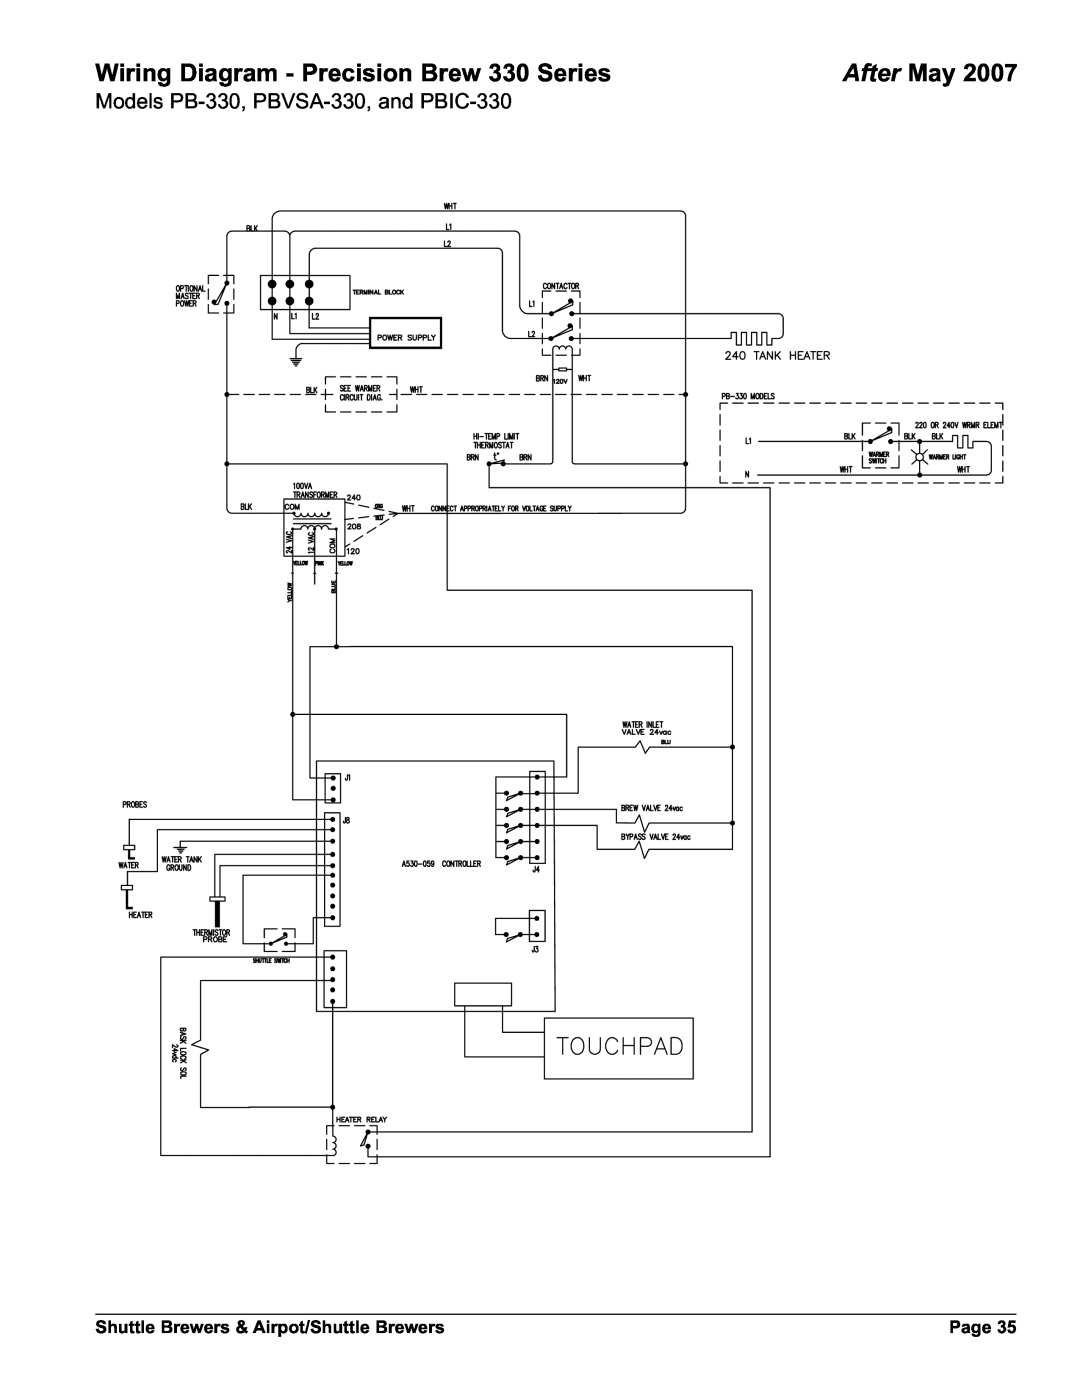 Grindmaster AM-344-04 Wiring Diagram - Precision Brew 330 Series, After May, Shuttle Brewers & Airpot/Shuttle Brewers 